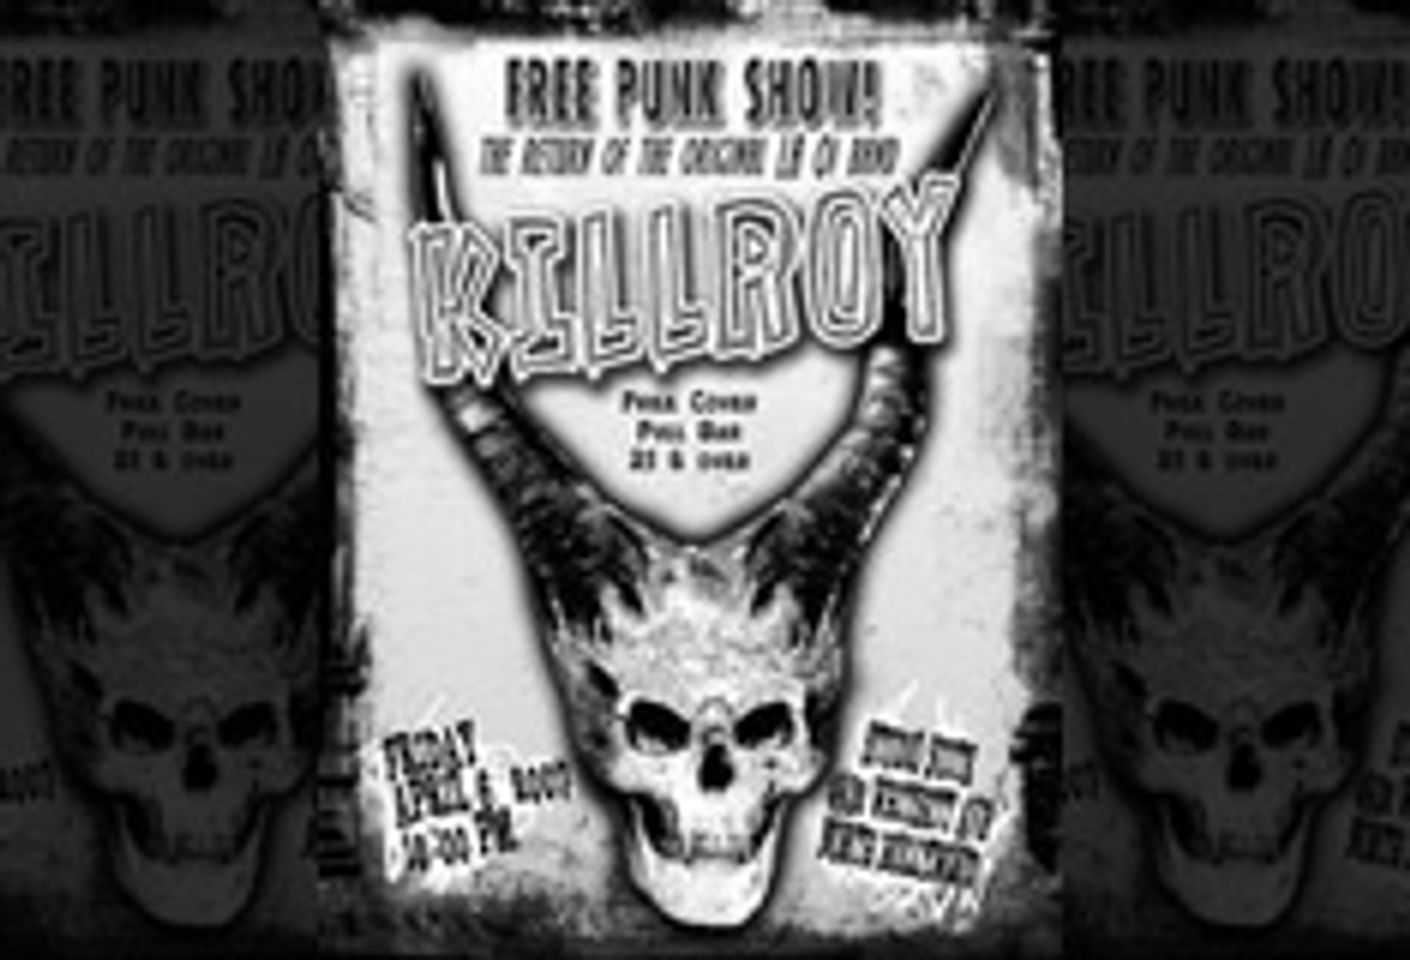 Jim Powers to Take Stage with Punk Band Killroy